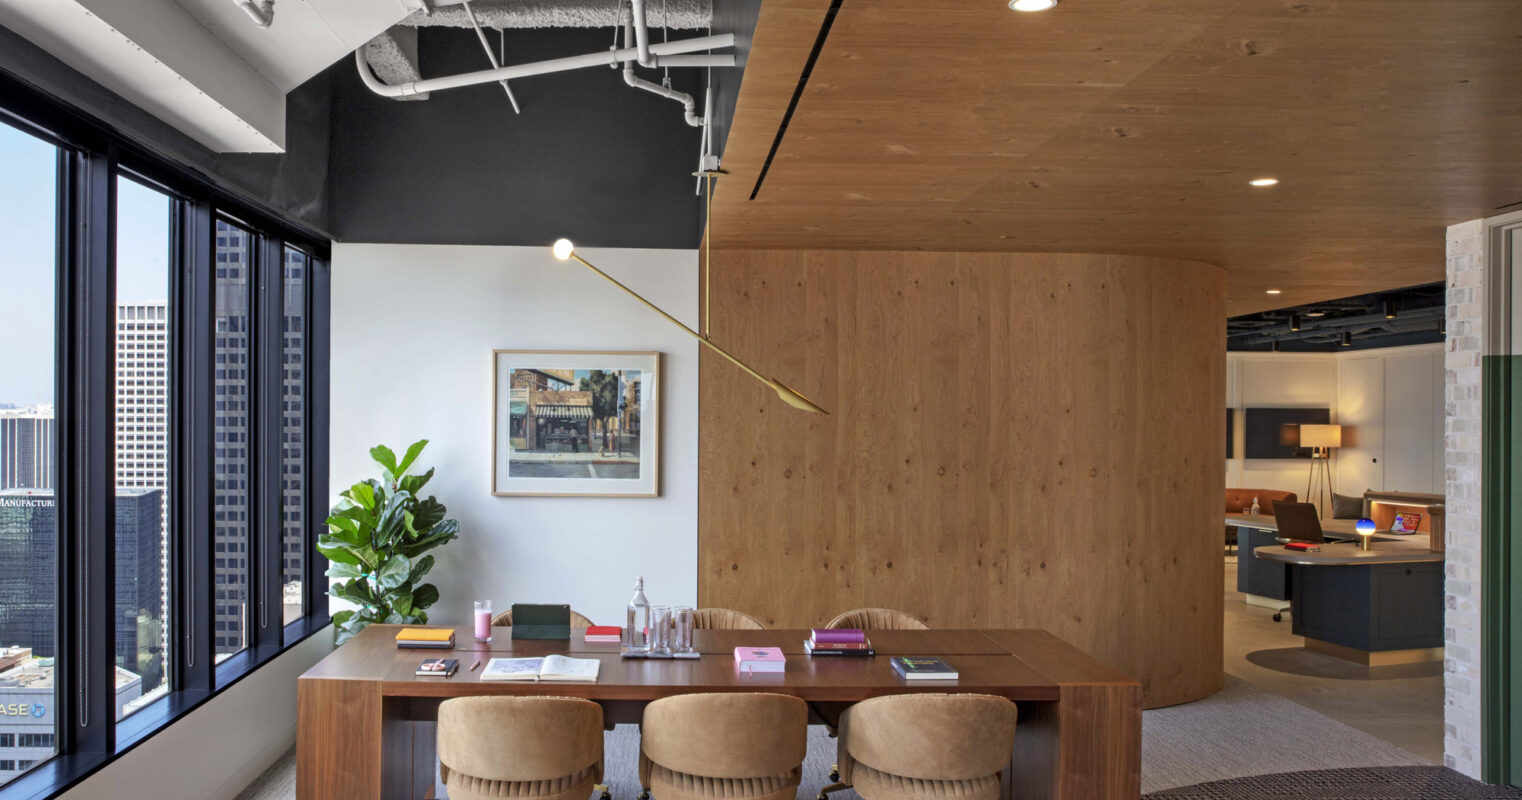 Modern office space with exposed concrete ceiling and ductwork. A warm-toned wooden wall panel contrasts with the industrial look. An oval, wooden table with four plush, swivel armchairs sits atop a textured gray rug, creating a cozy meeting area. Floor-to-ceiling windows offer expansive city views.